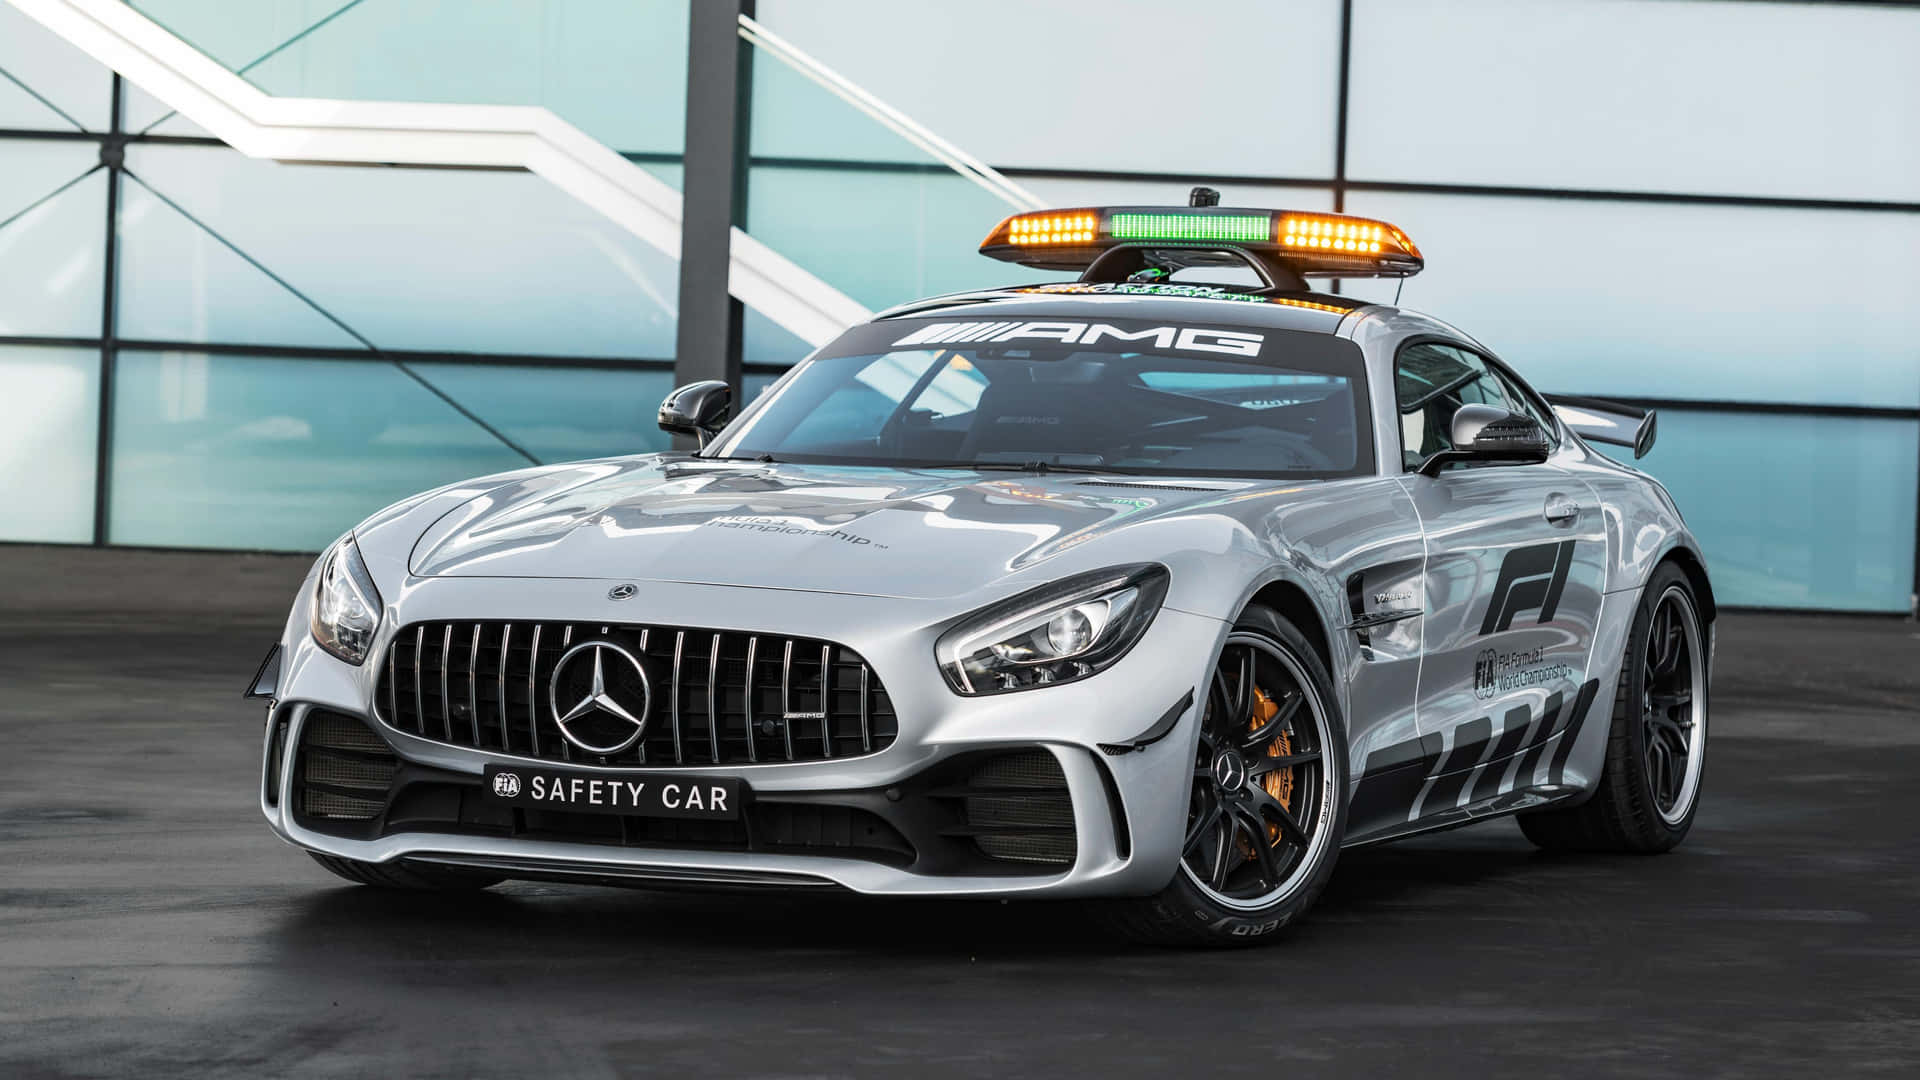 Modern Safety Car in action on the racetrack Wallpaper